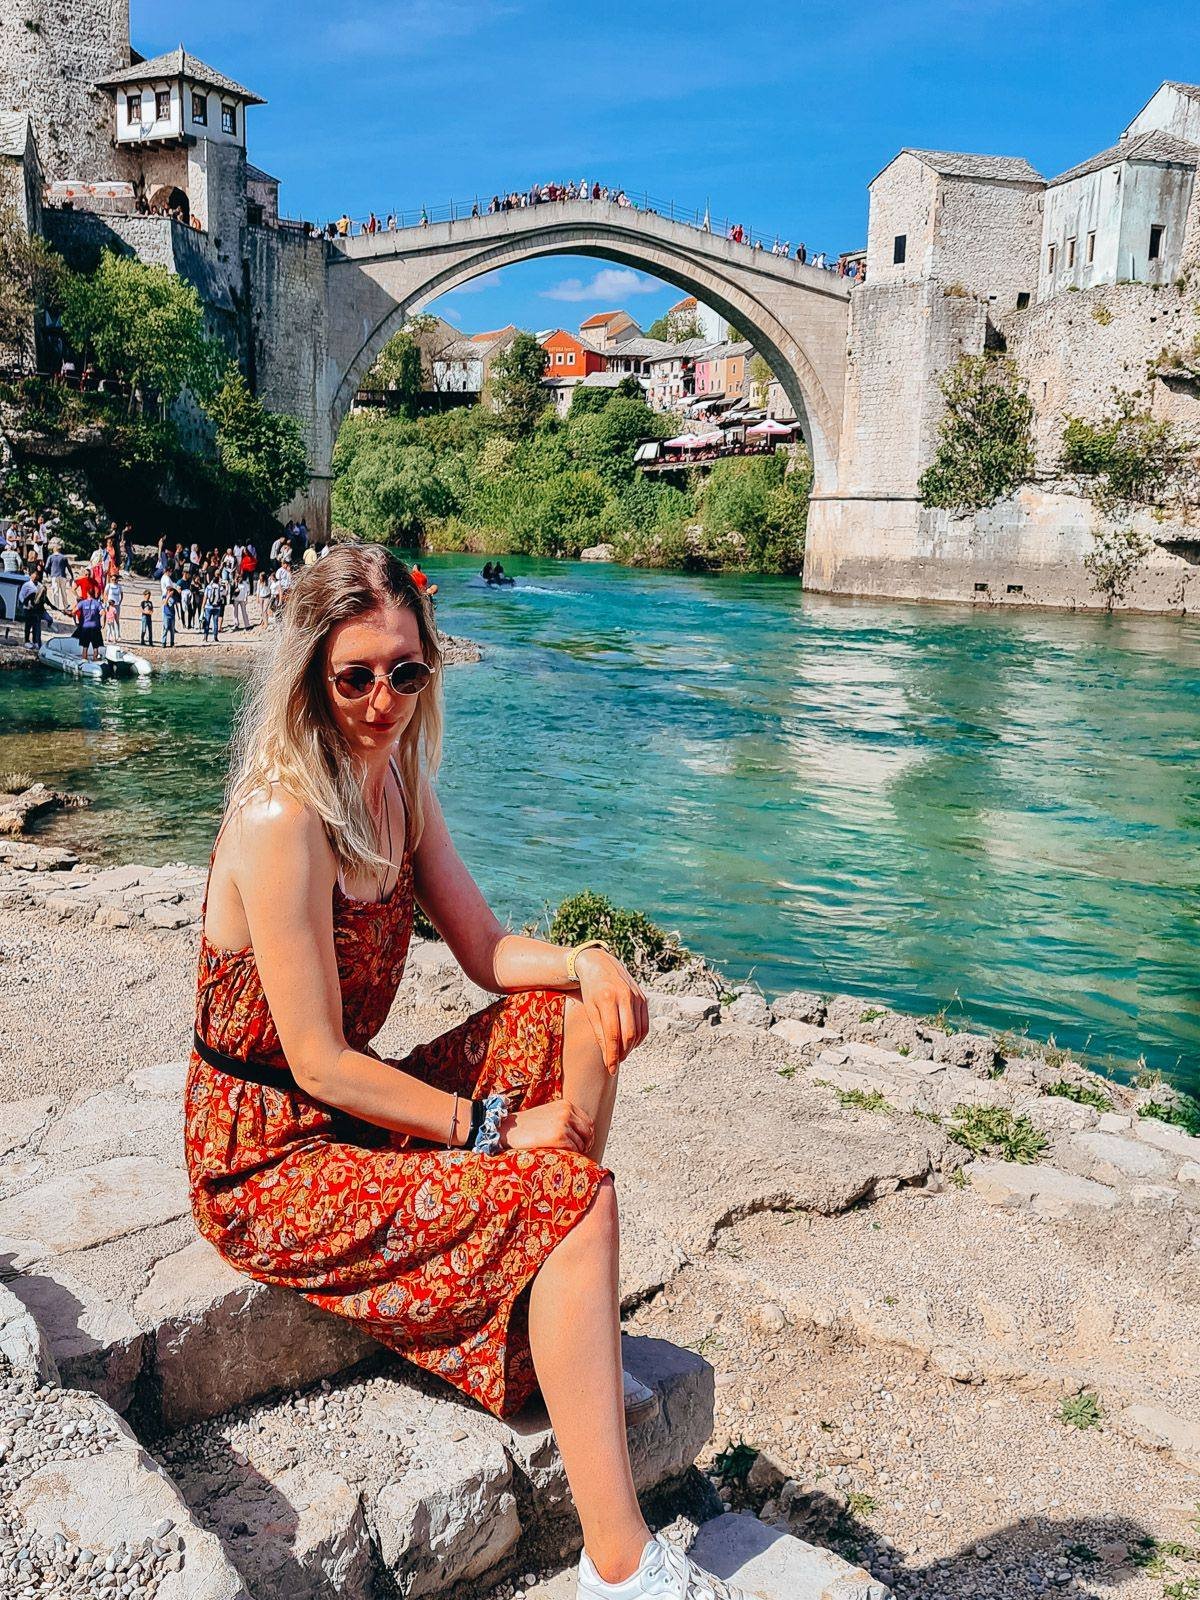 girl sitting on a rock by a river with the famous domed bridge of Mostar in the background